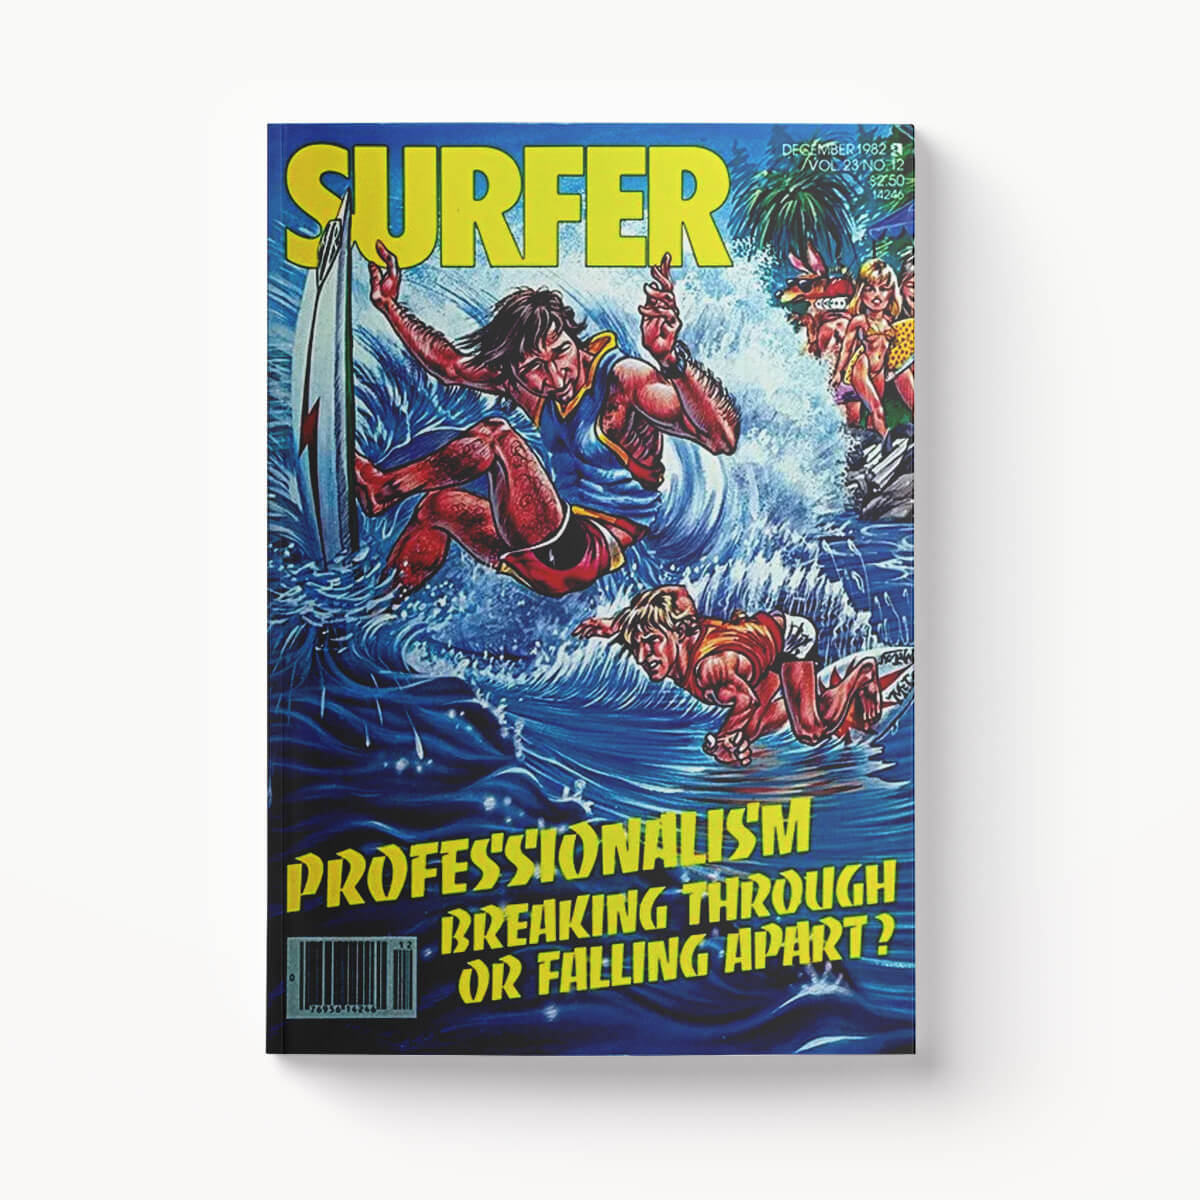 Cover of Surfer Magazine in 1982 featuring art by Phil Roberts